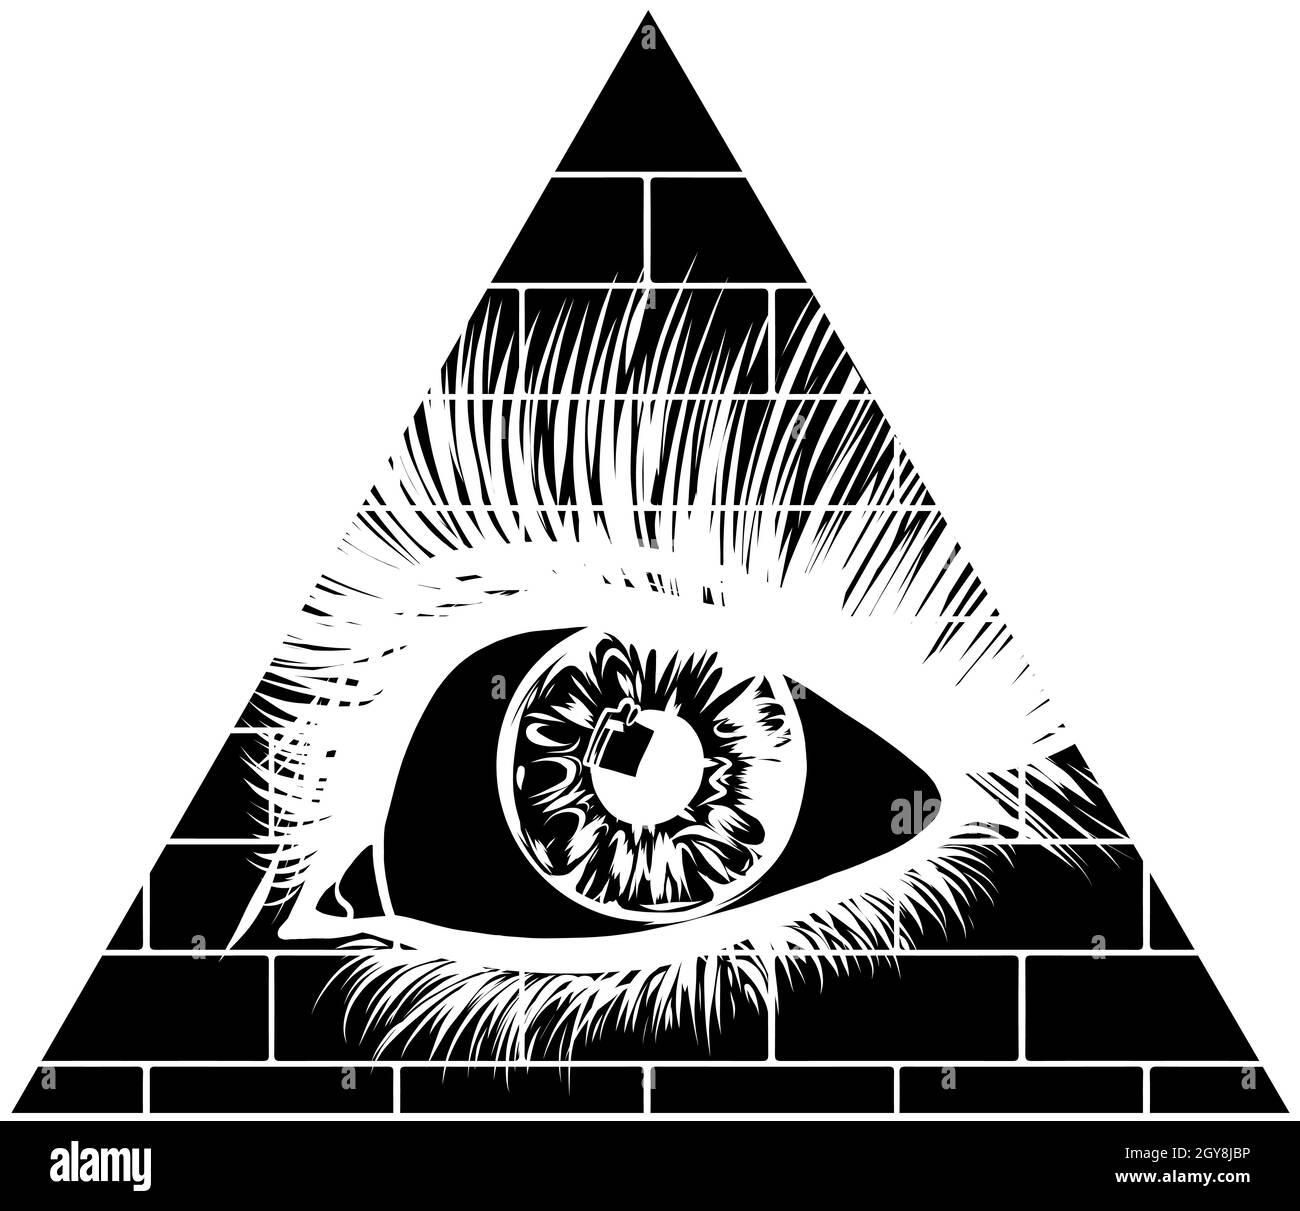 Eye of providence. All seeing eye in the triangle on top of the pyramid masonic symbol. Occult illuminati illustration. Stock Photo